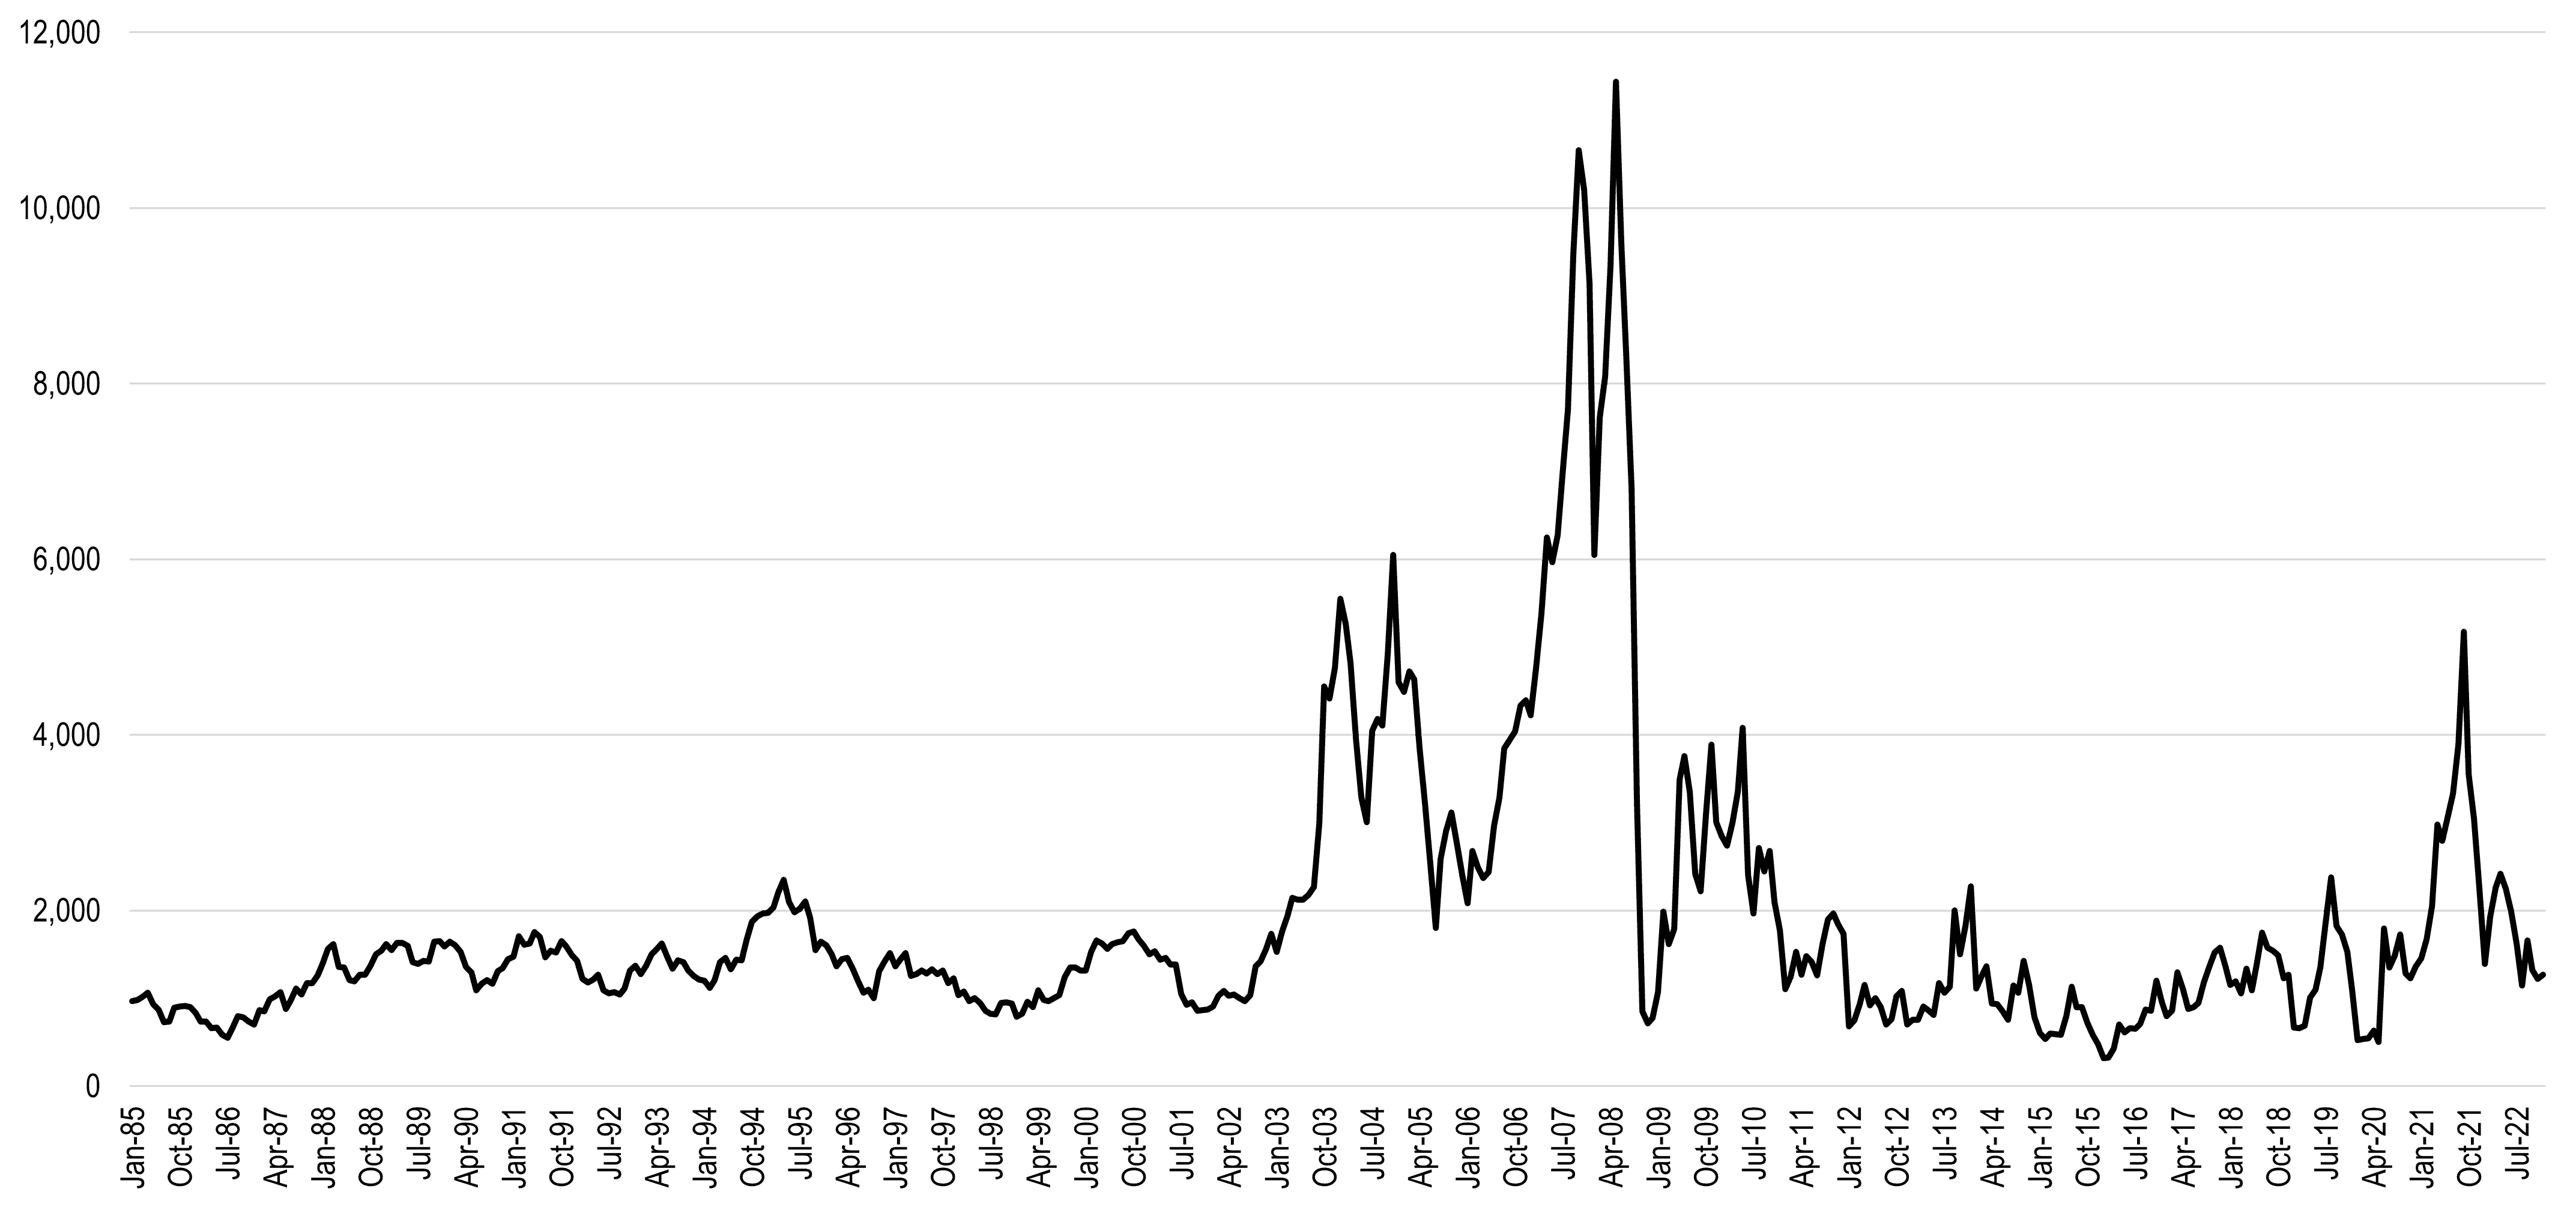 baltic_dry_index.png